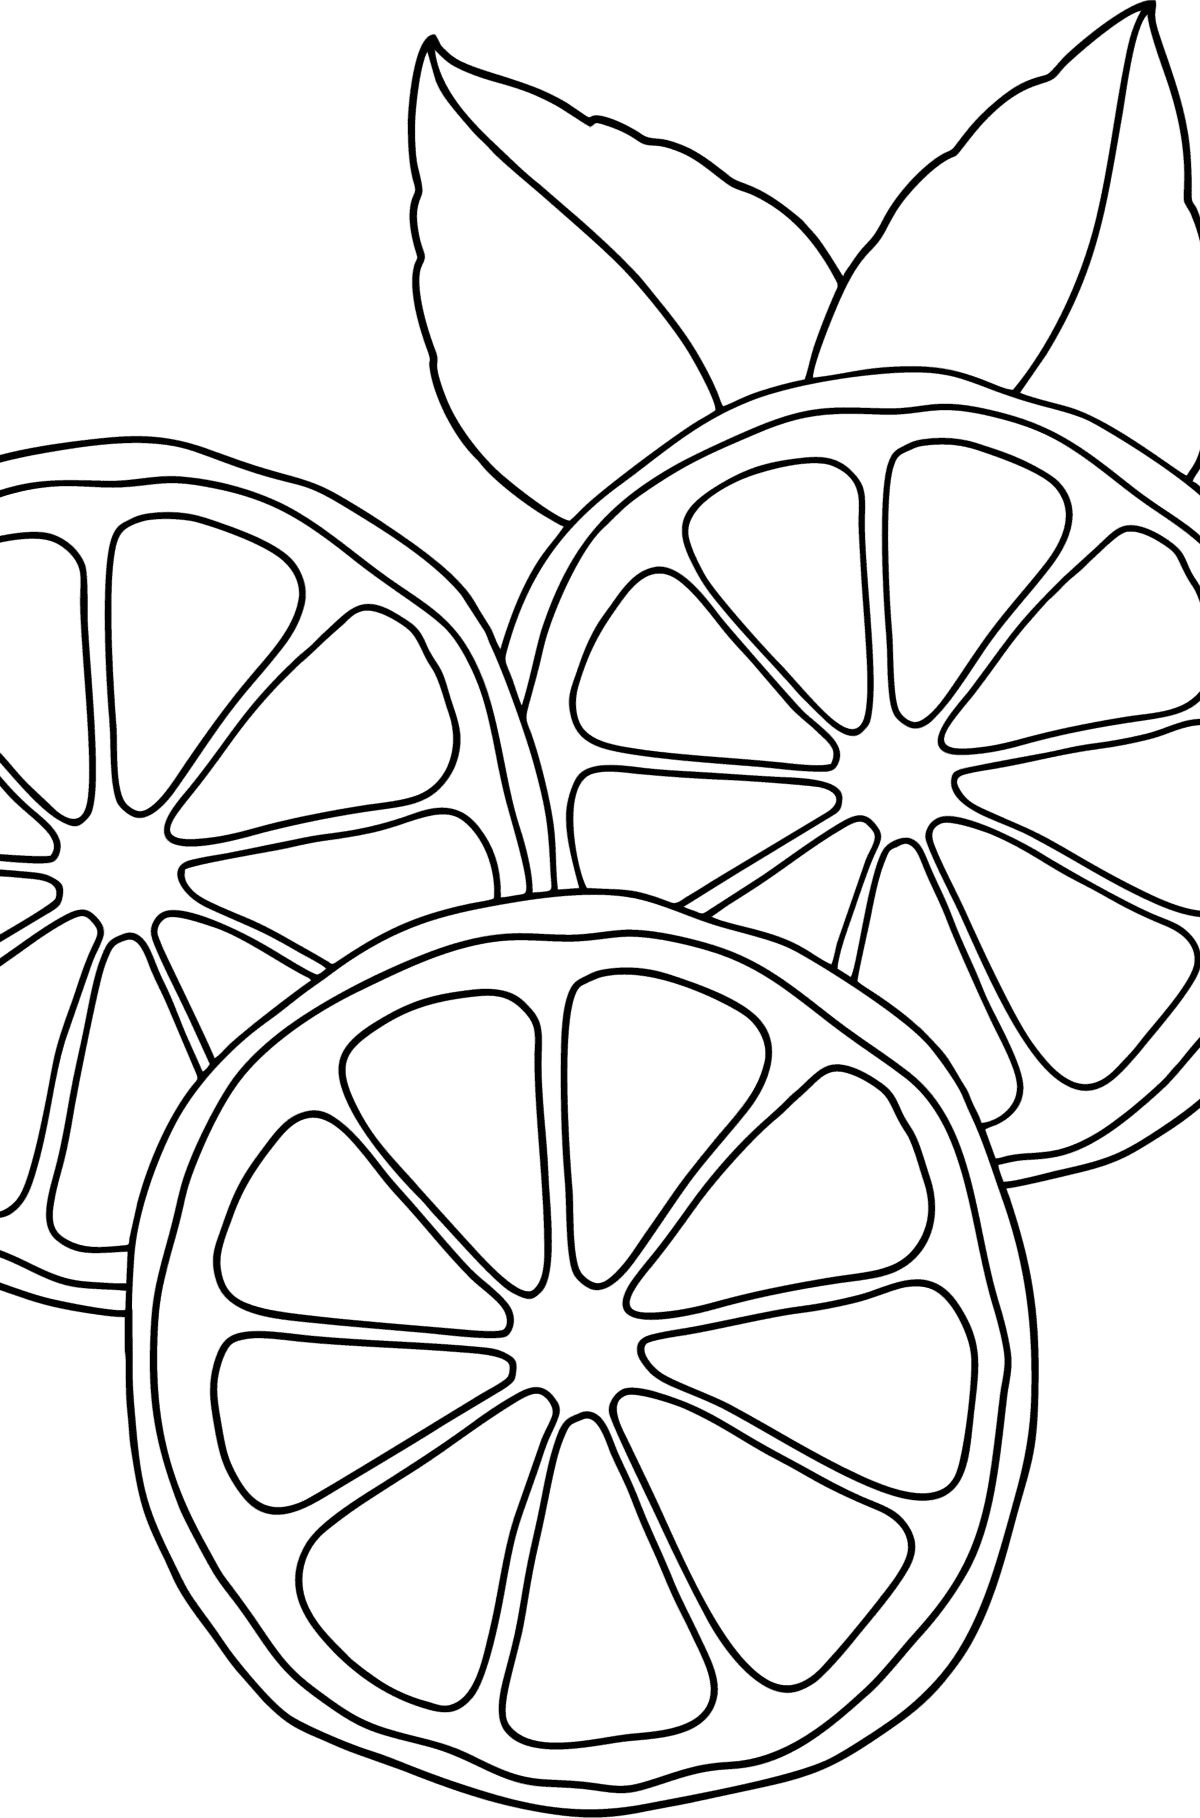 Three oranges сoloring page - Coloring Pages for Kids